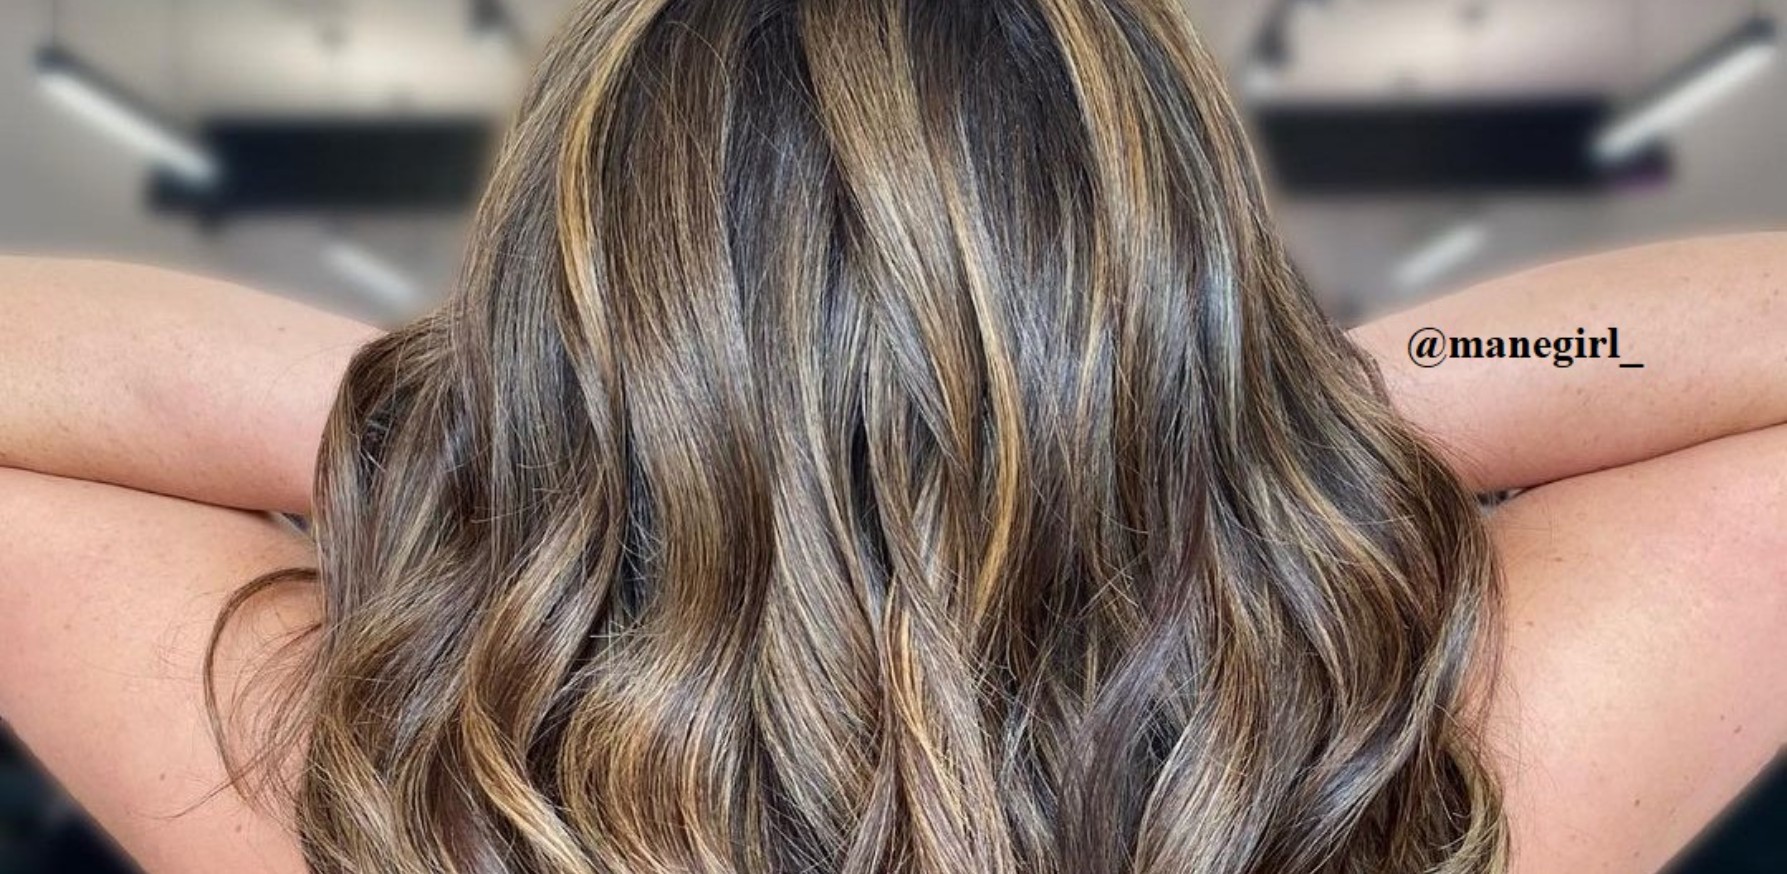 7 Golden Brown Hair Color Ideas That Are Popular RN